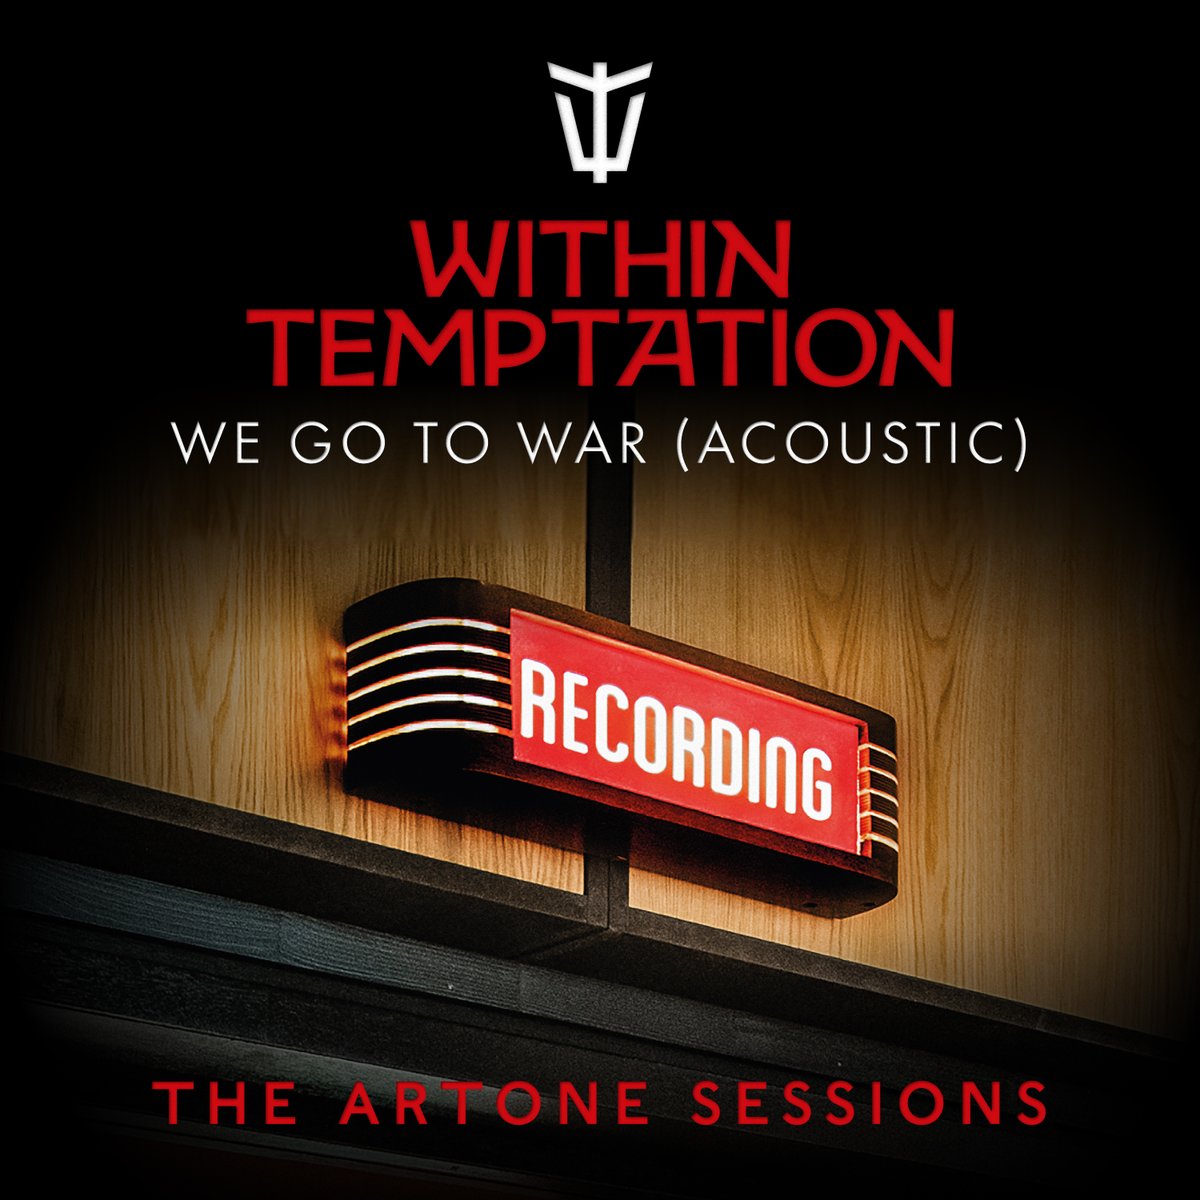 This Saturday, we are celebrating Record Store Day! For this day, we've recorded an EP called 'The Artone Sessions' at Artone Studios in Haarlem. We recorded four songs, live & direct to disc. The first 6000 buyers on Record Store Day will receive this EP for free. Listen to the